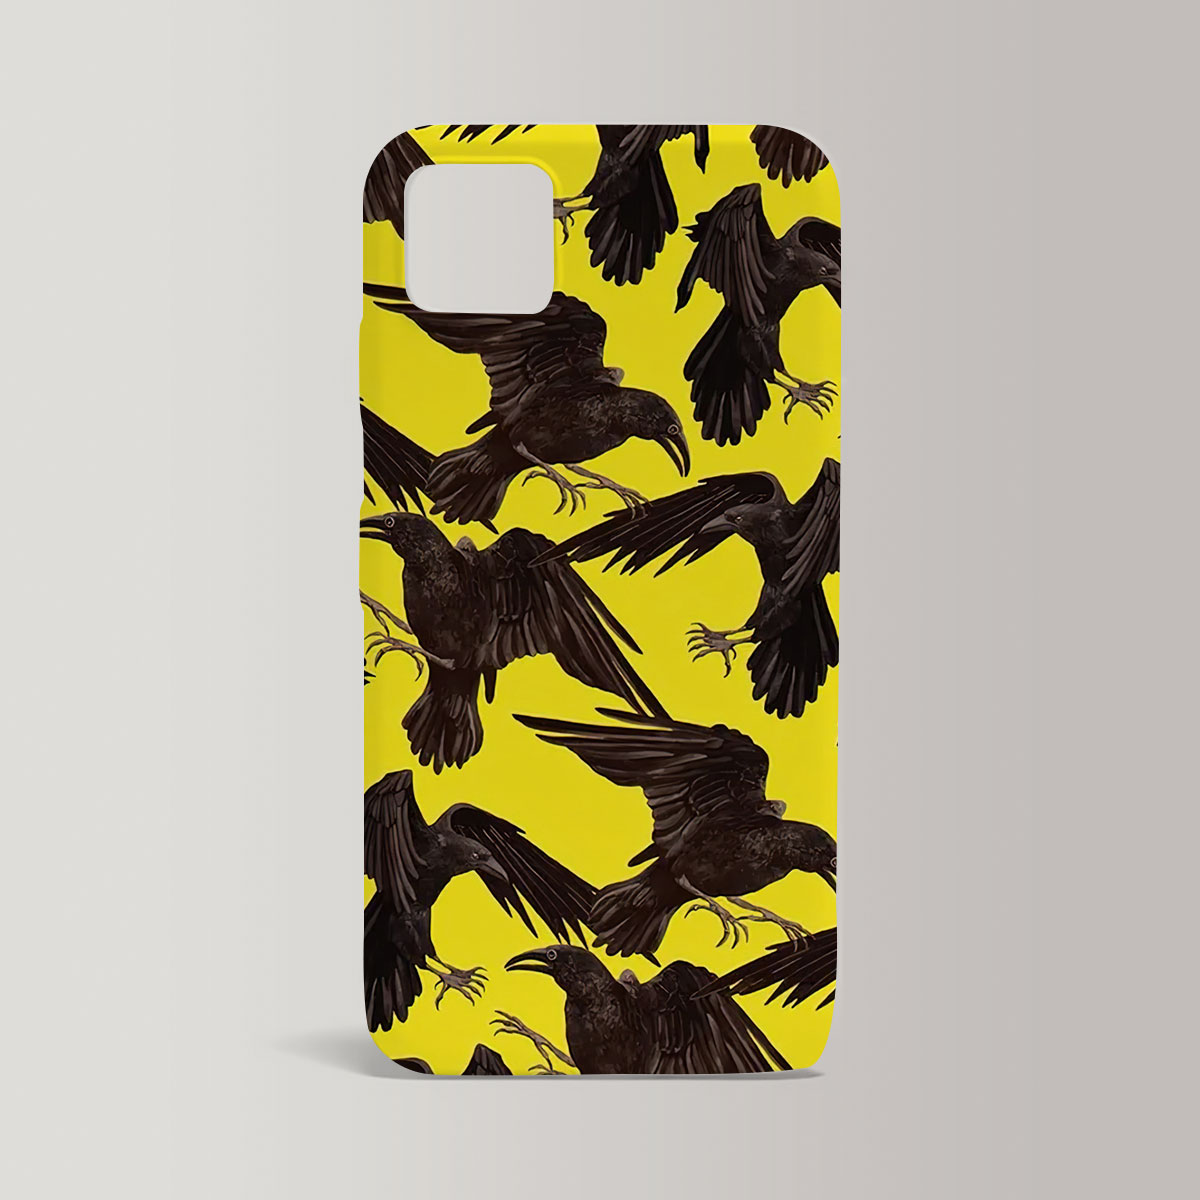 Raven On Yellow Background Iphone Case